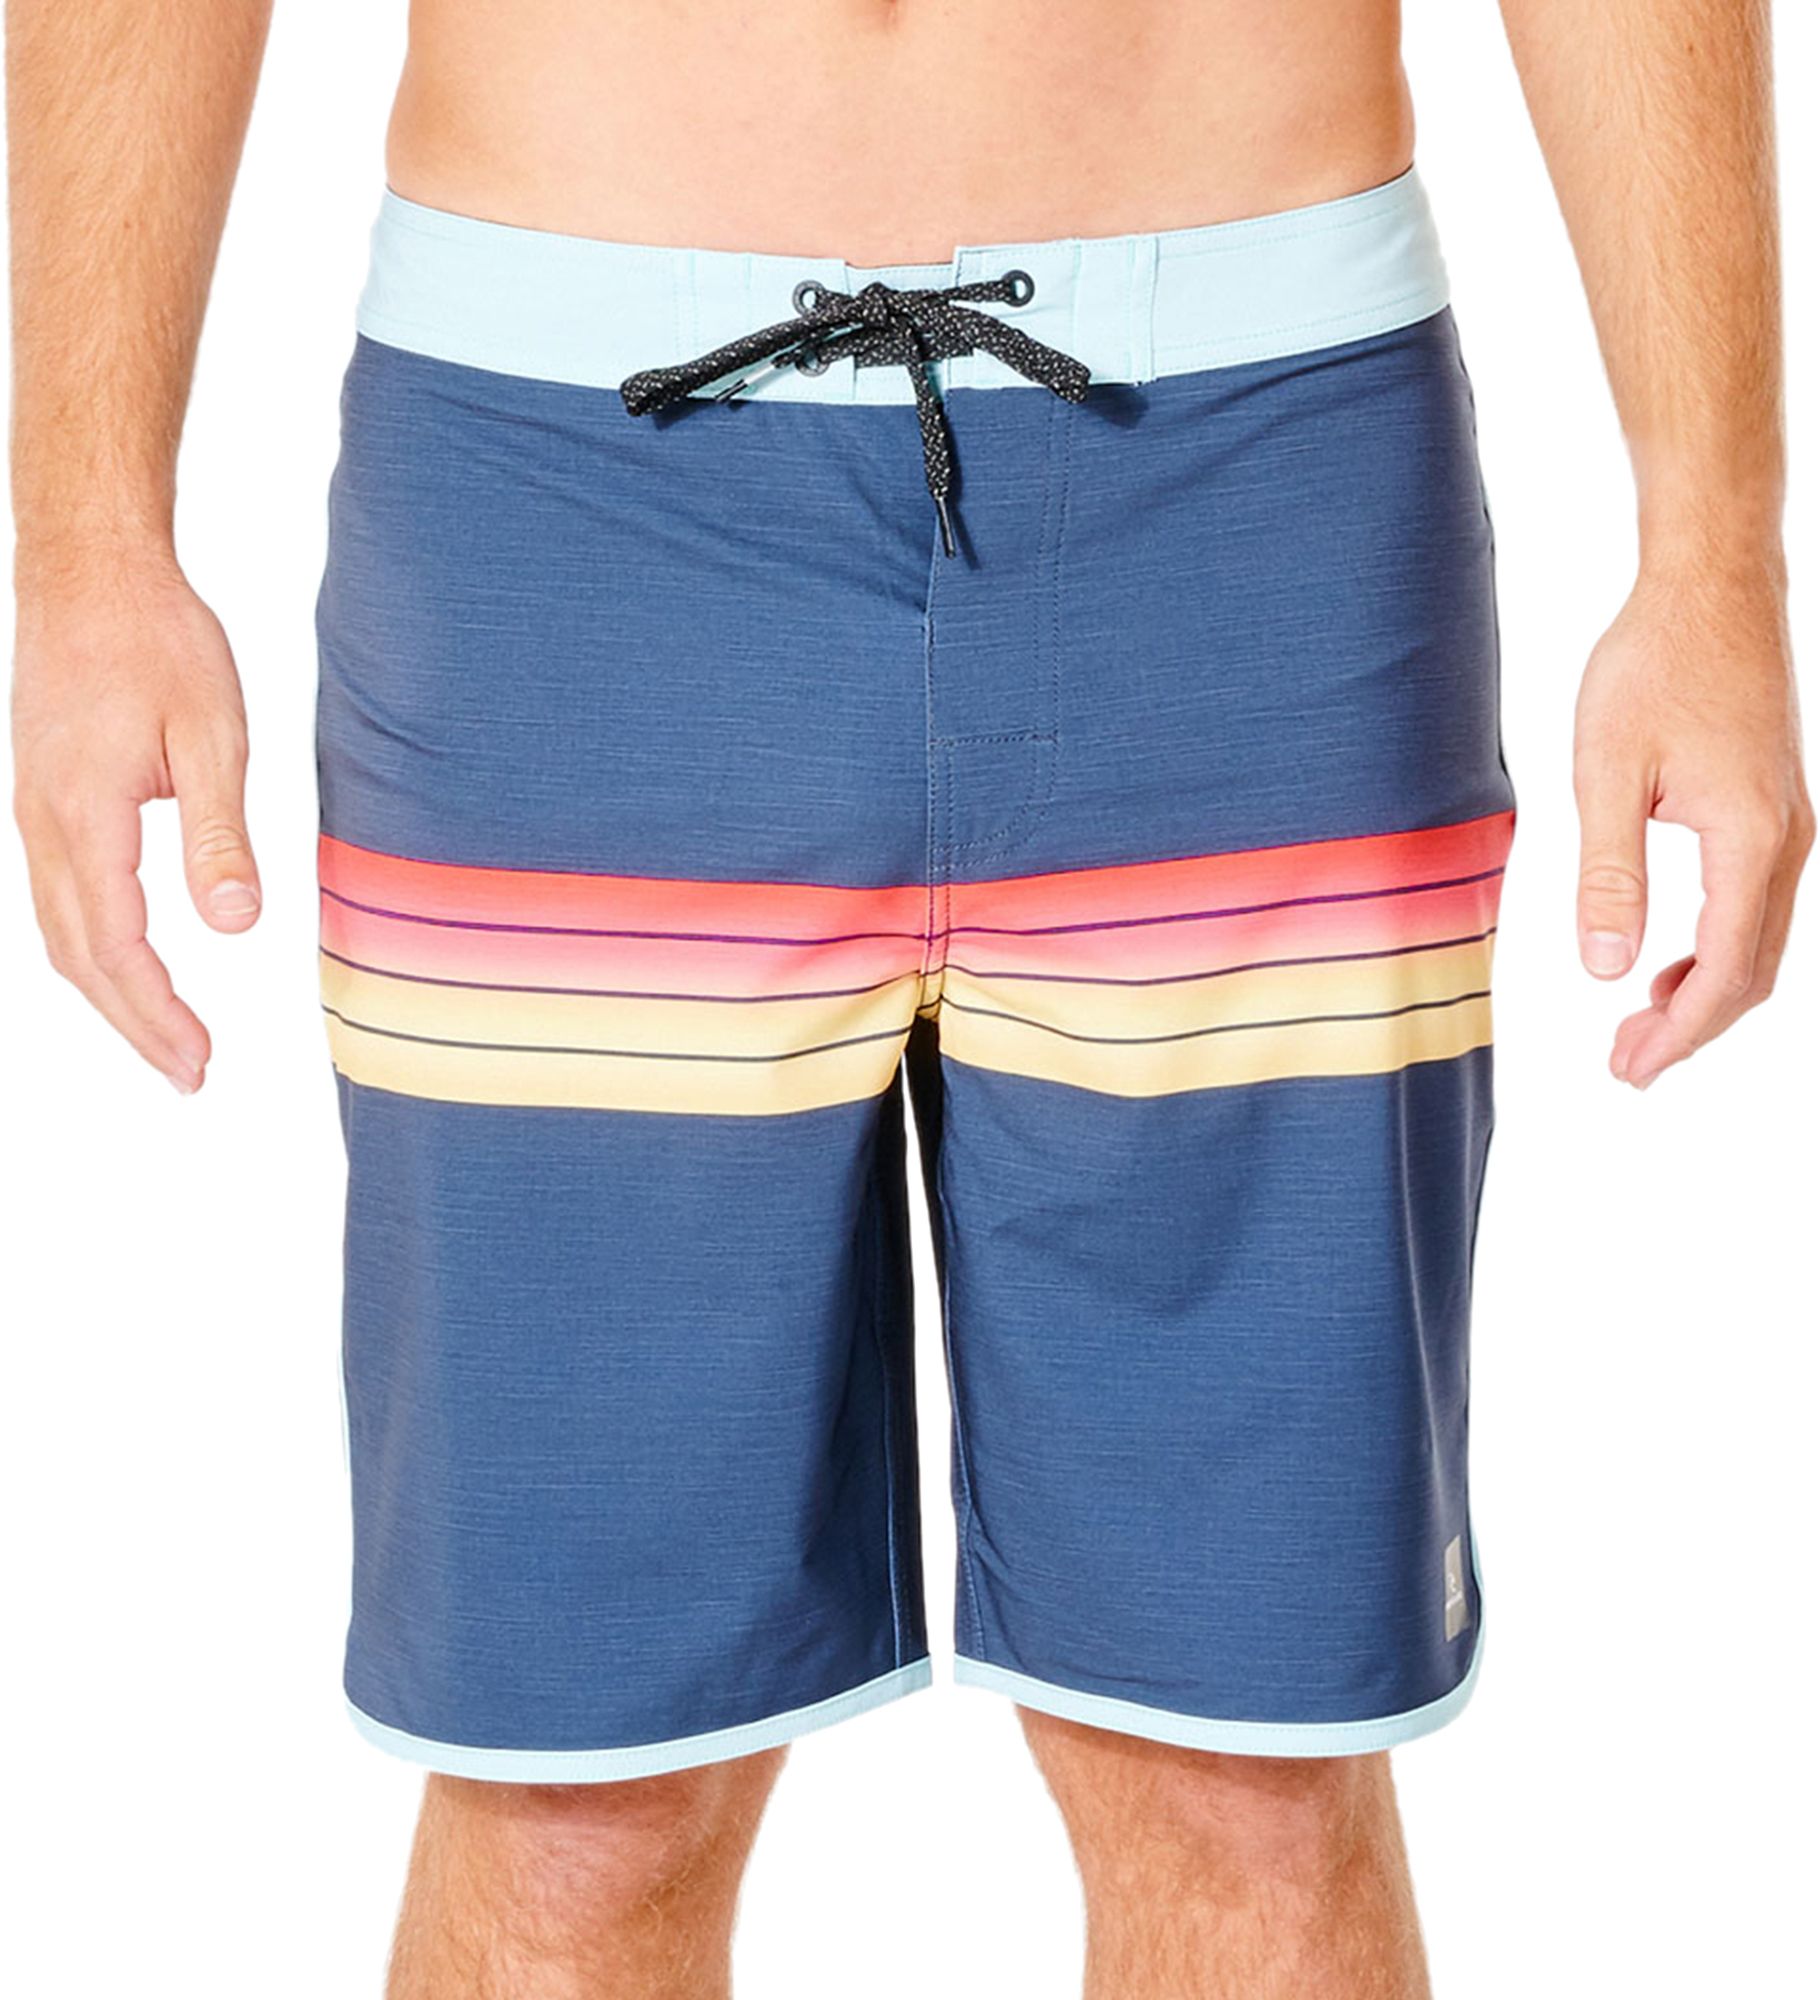 Photos - Swimwear Rip Curl Men's Mirage Surf Revival 19” Board Shorts, Size 38, Navy 21AW9MM 